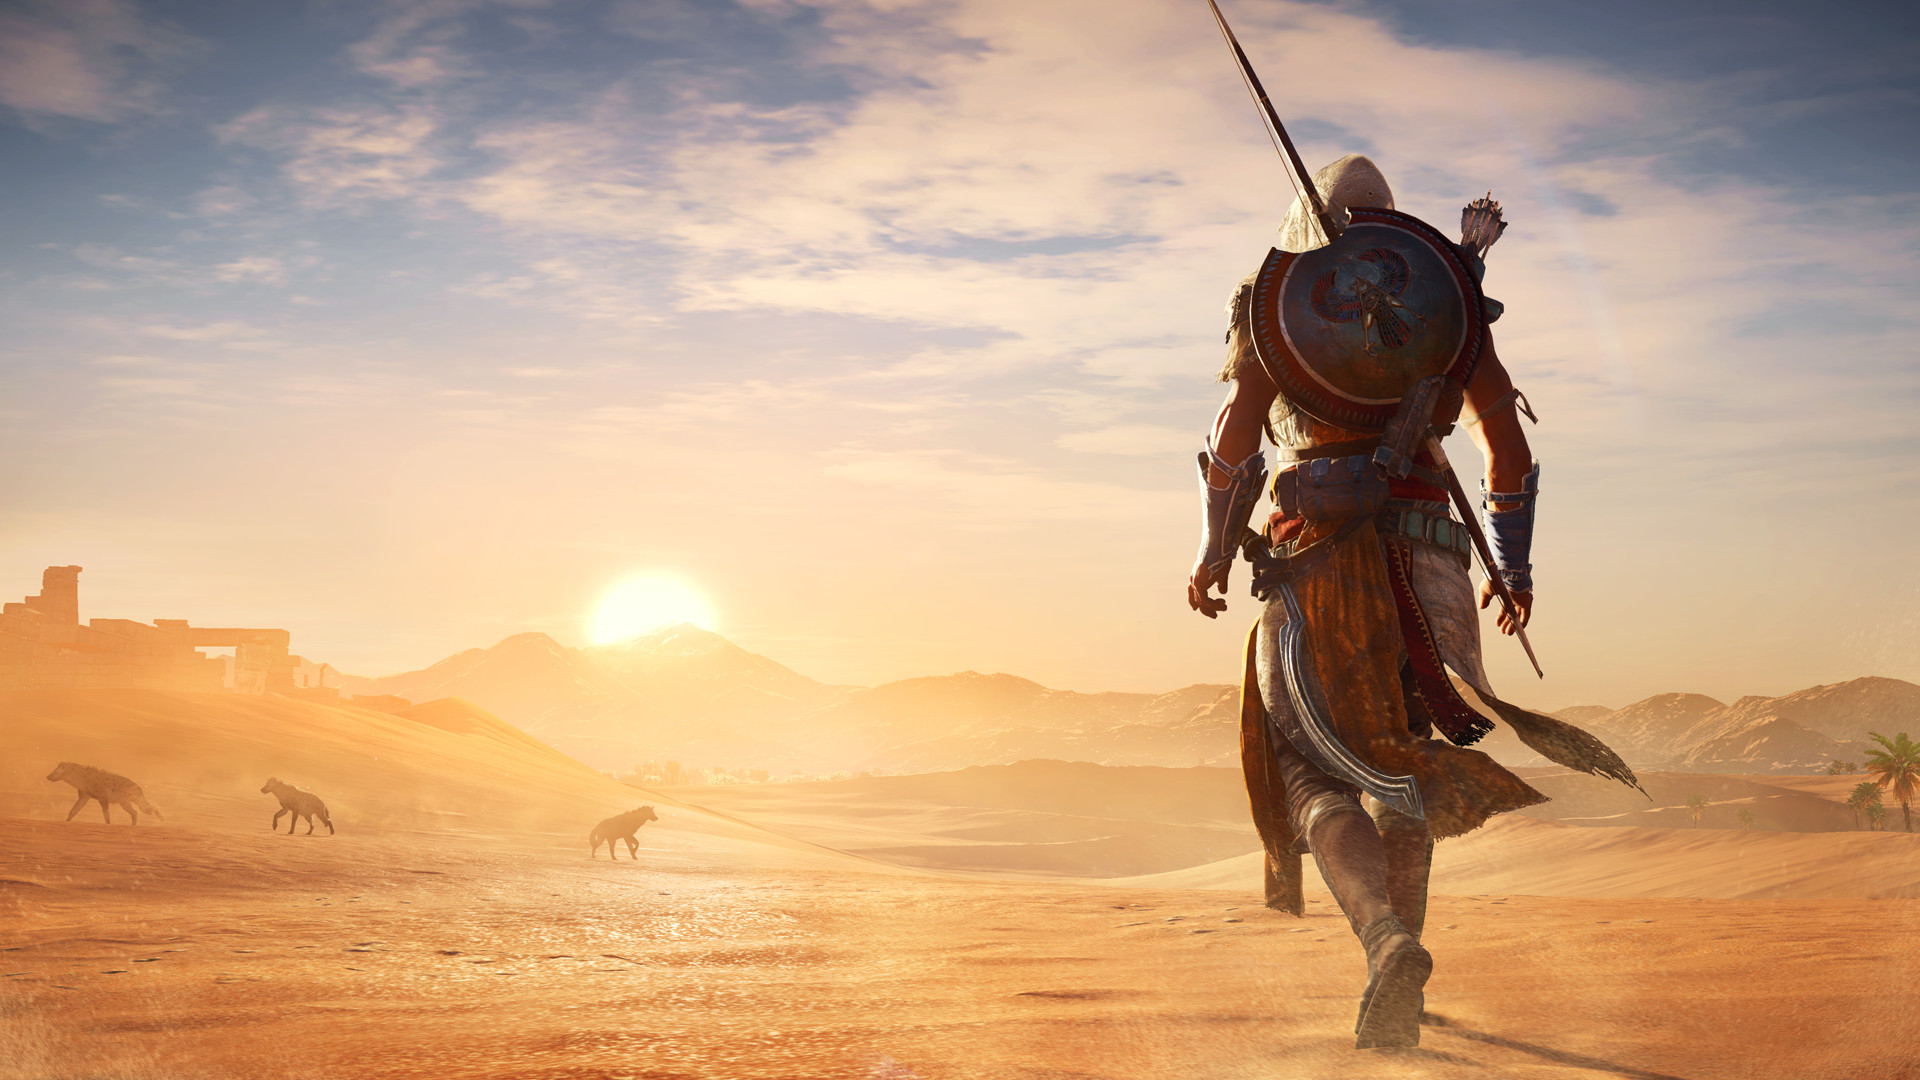 Assassin's Creed Origins PC Version Overview & Gameplay 